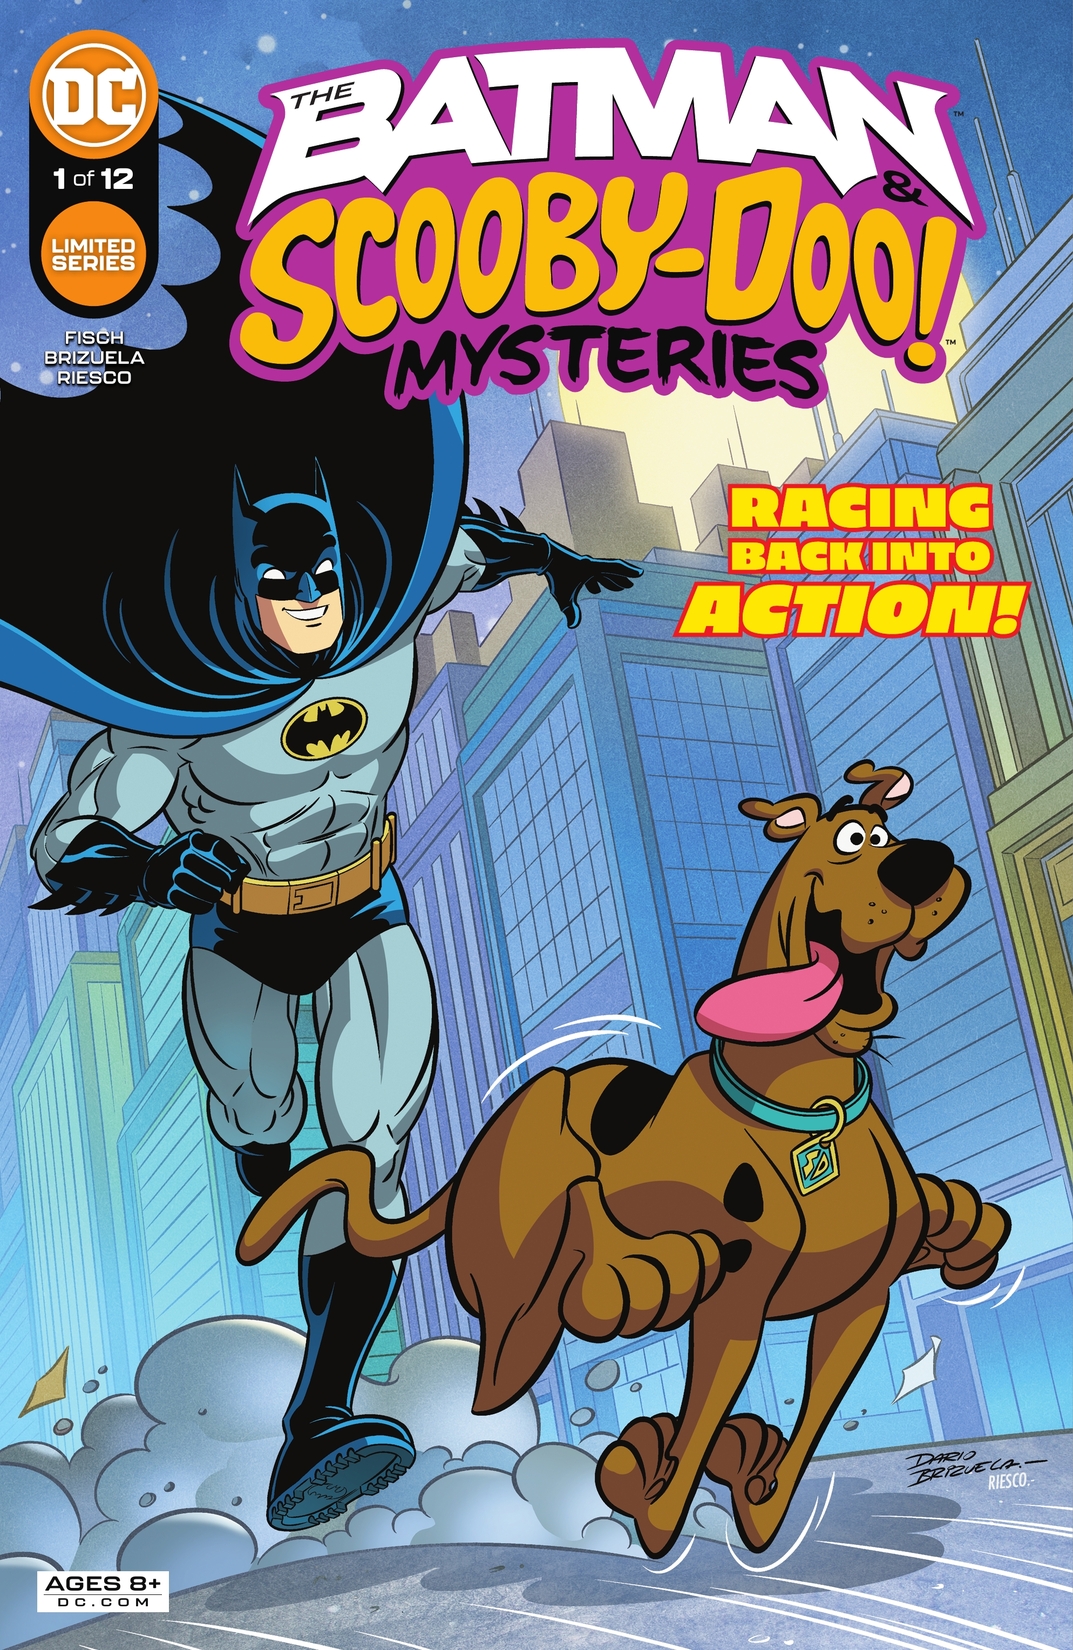 The Batman & Scooby-Doo Mysteries #1 preview images